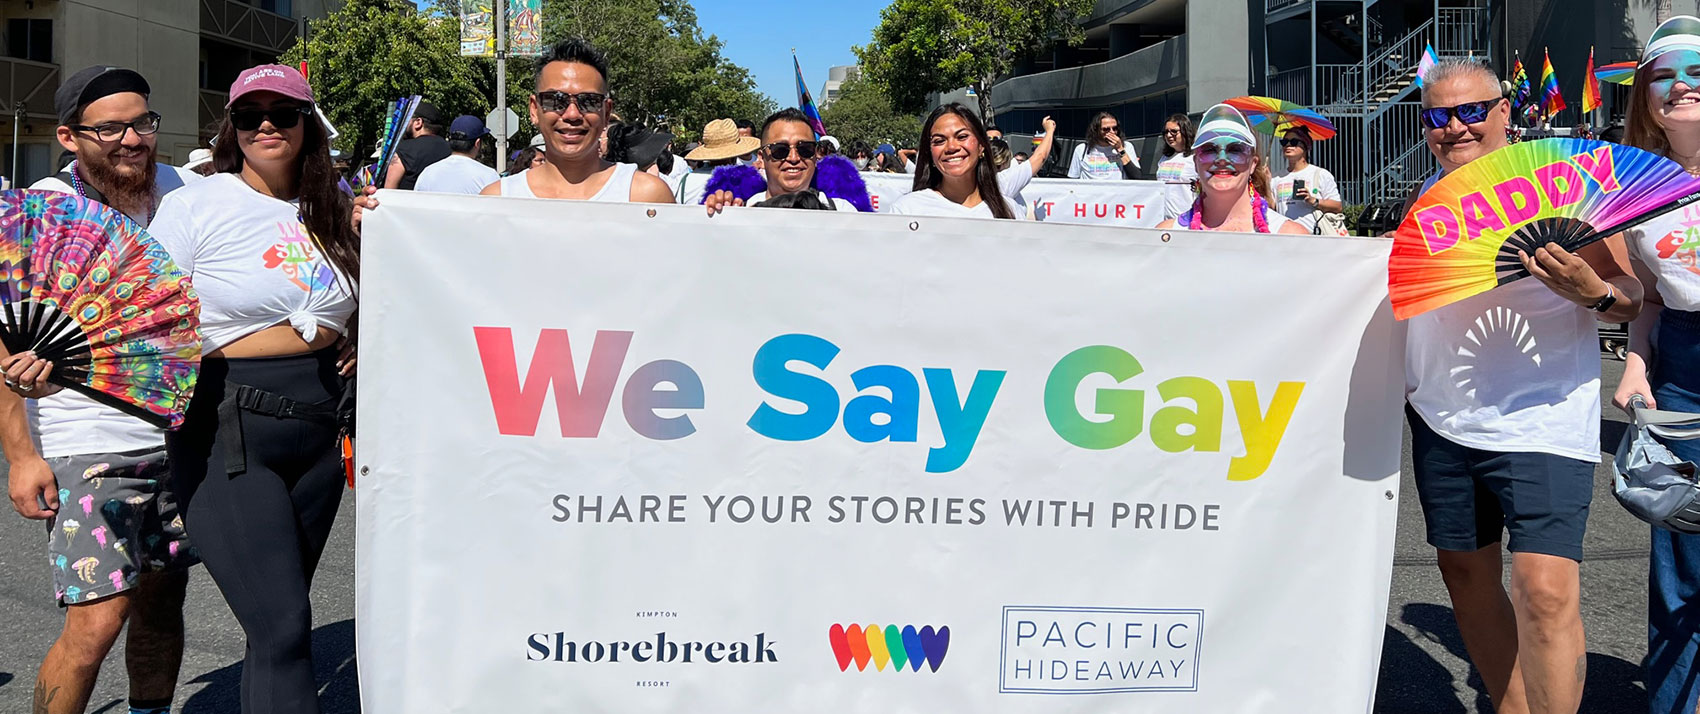 Pride Parade attendees with Shorebreak Pride banner that says We Say Gay - Share Your Stories with Pride